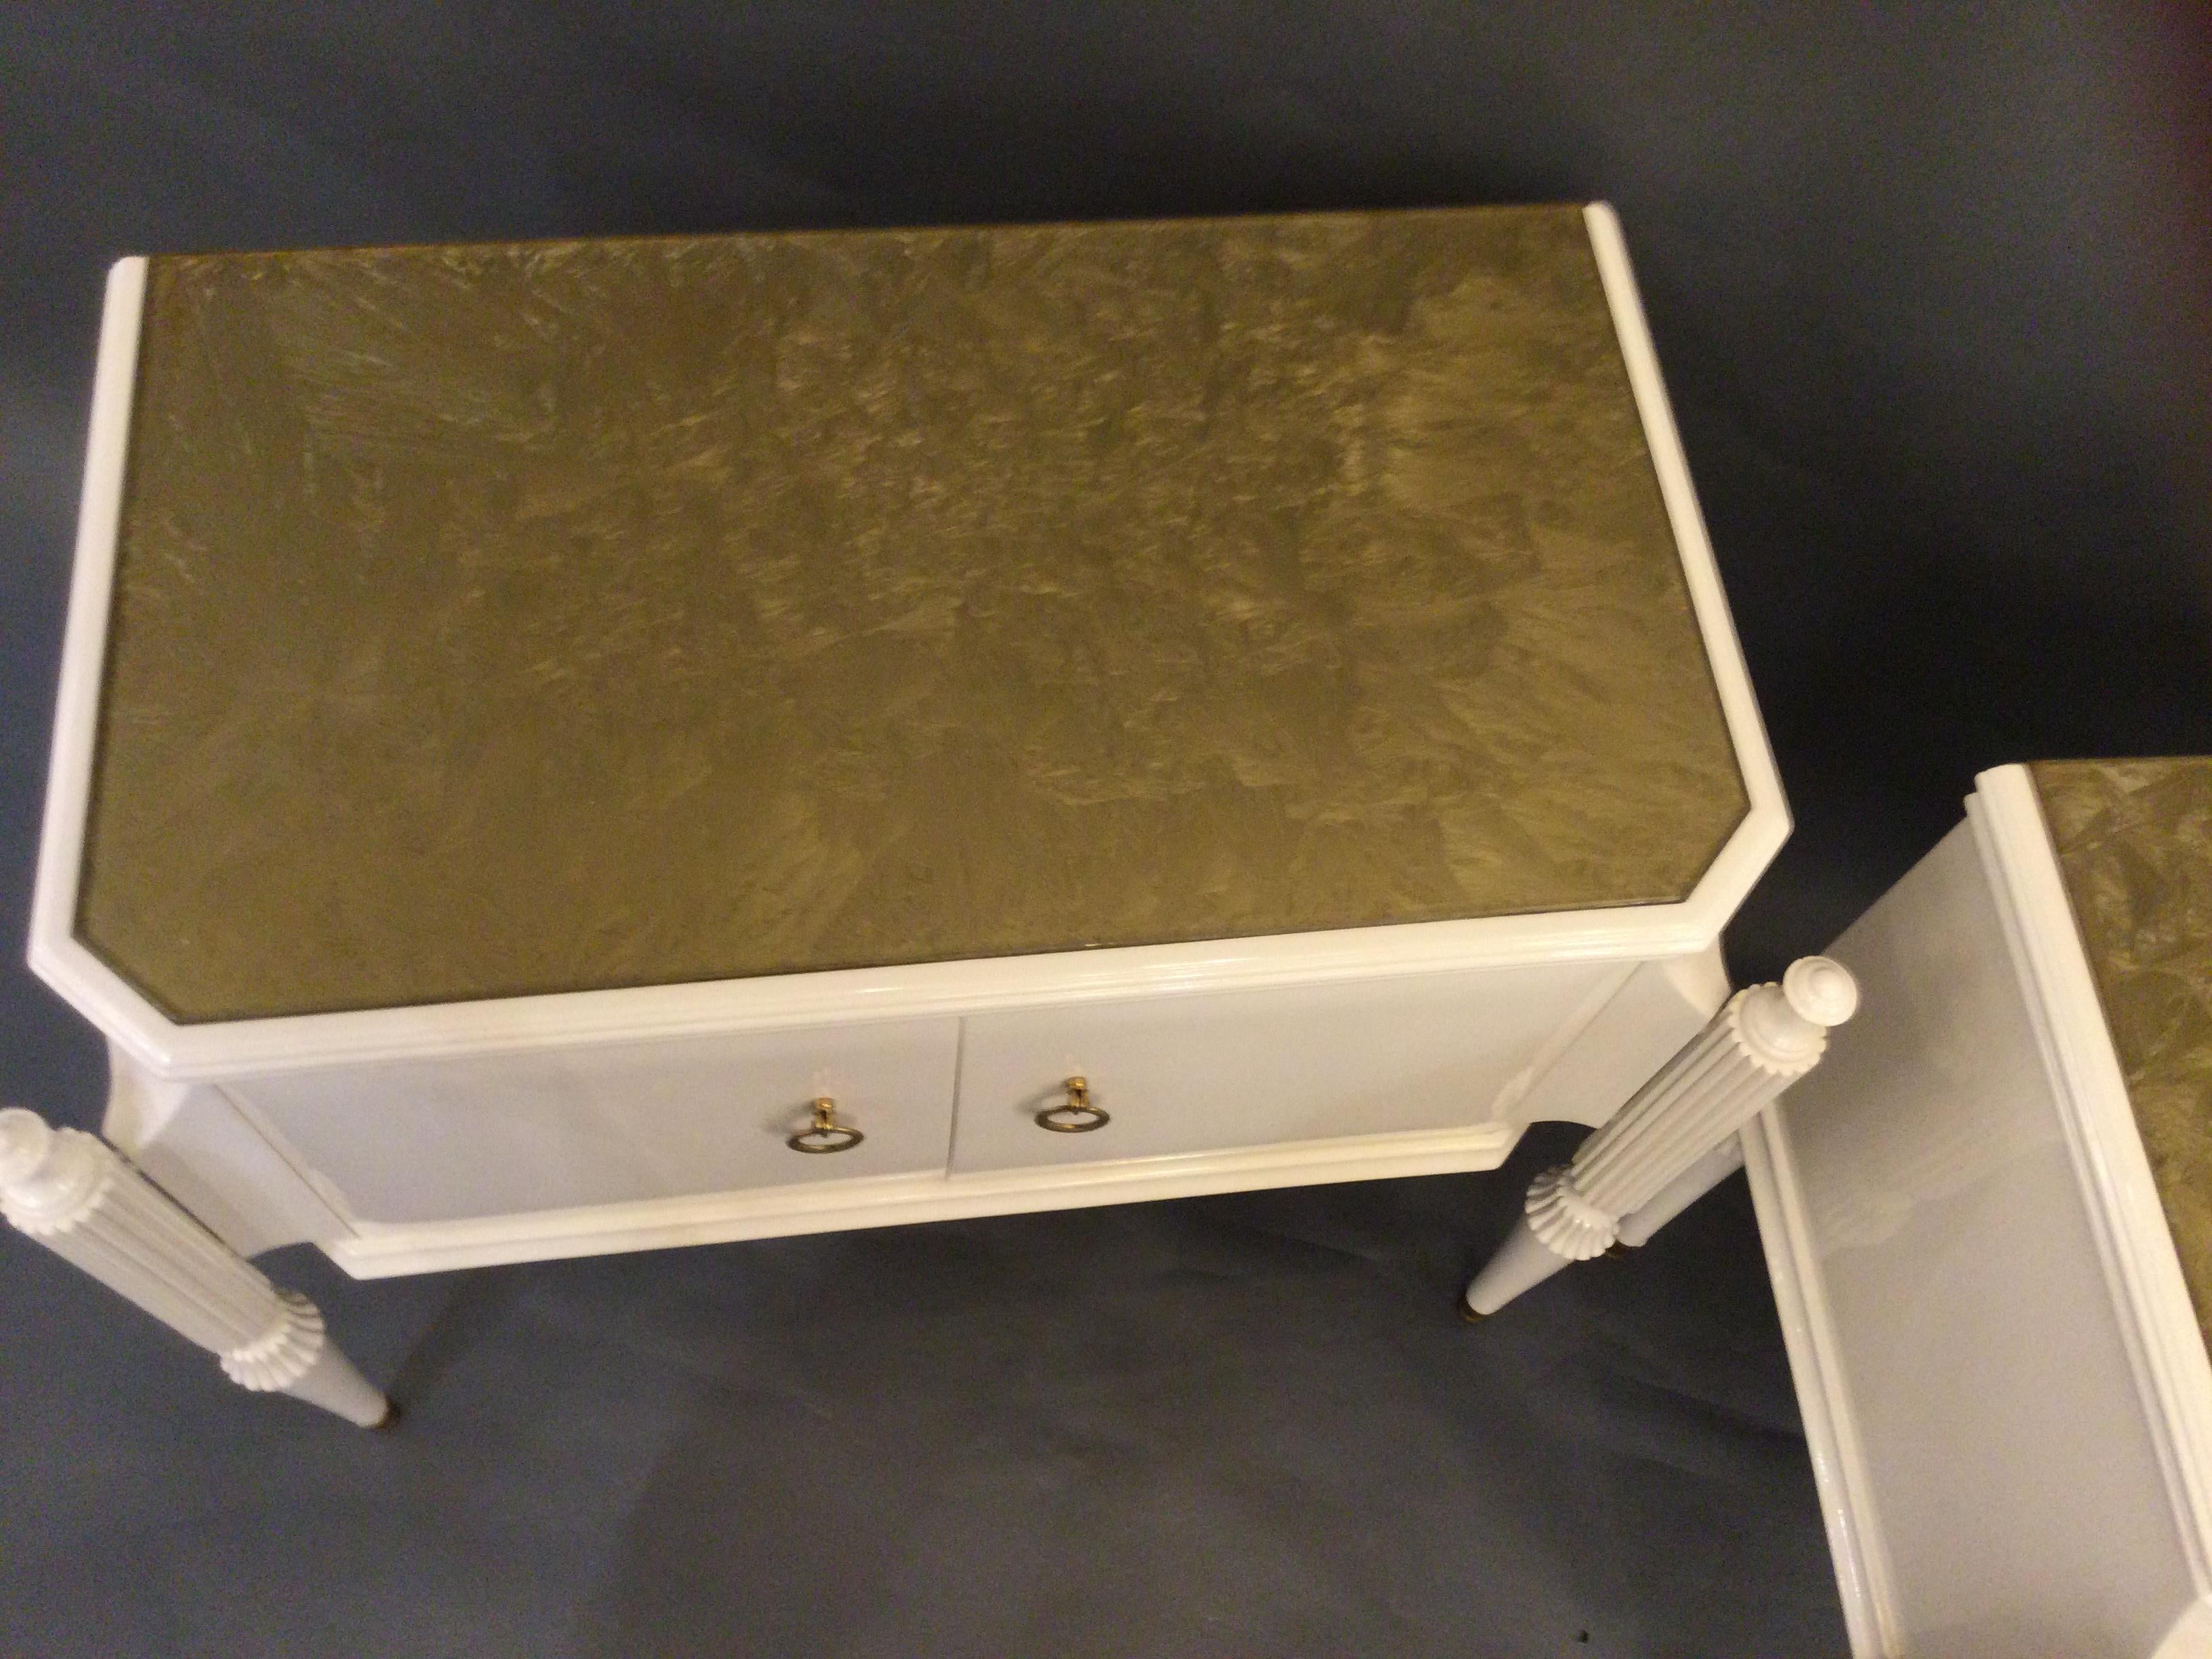 A stunning pair of side tables in lacquered wood, gold glass top, two doors, brass feet and handles with original patina.
This elegant pair of tables would look stunning in any interior.